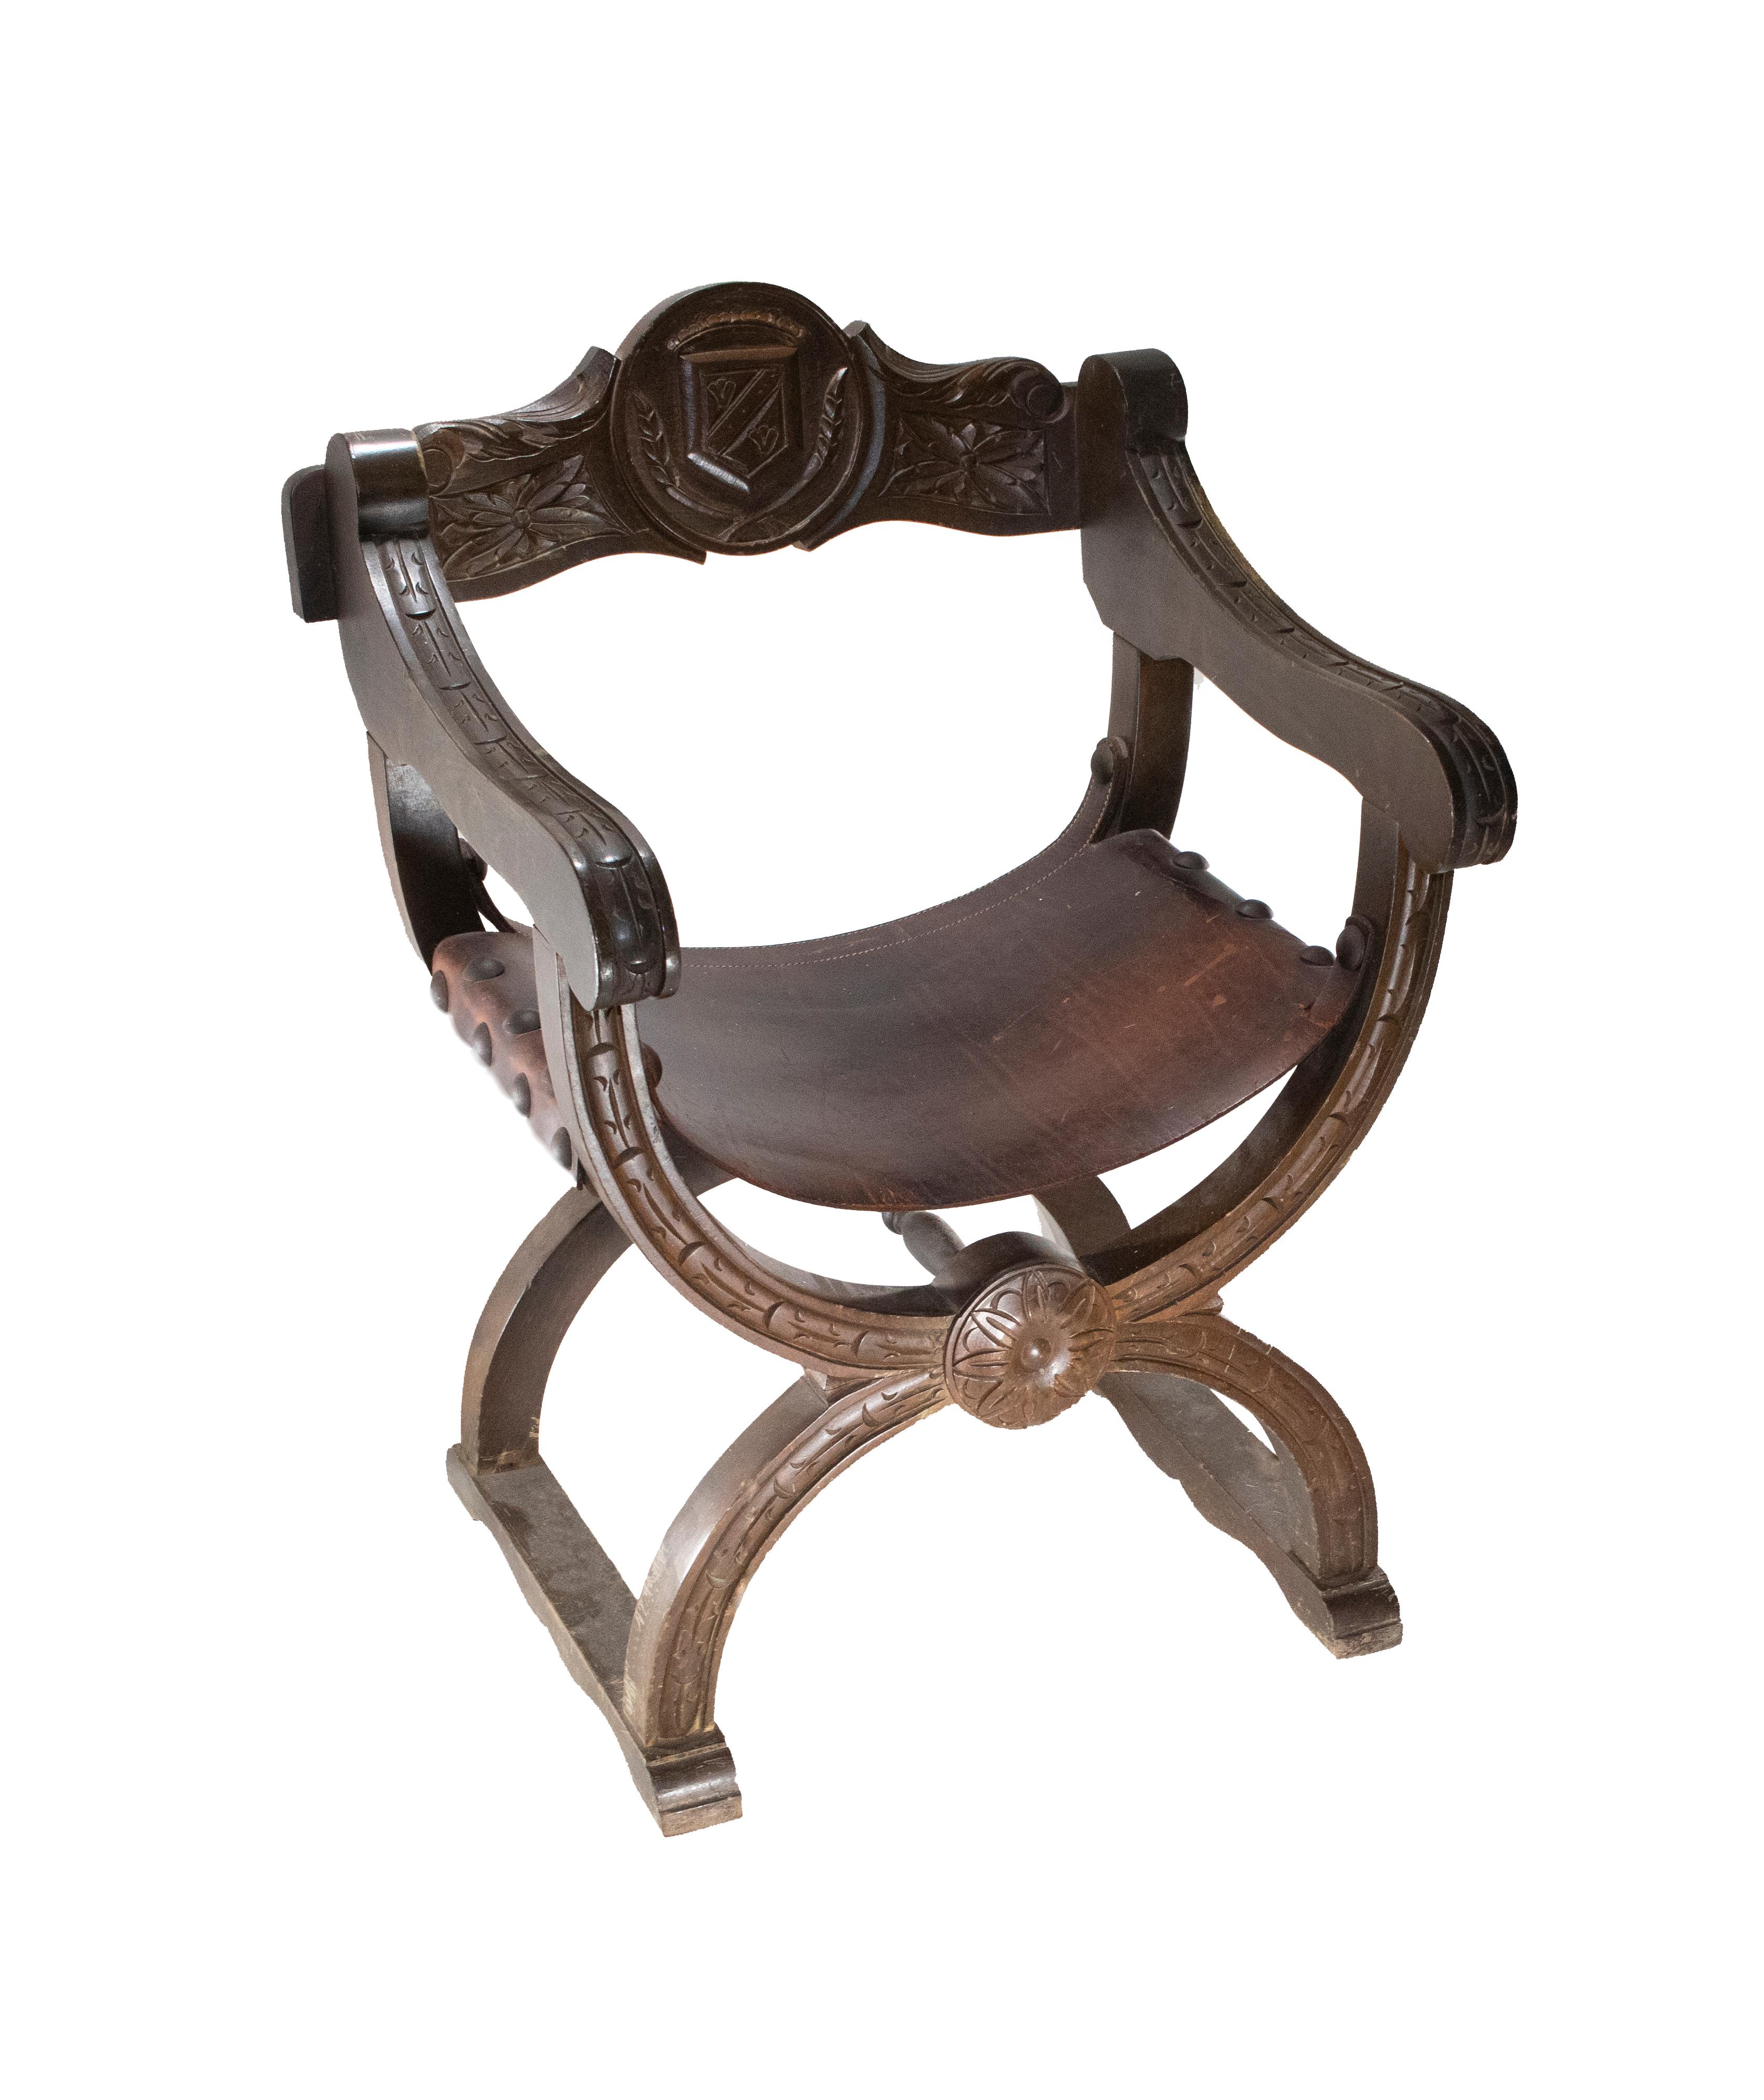 A lovely mid-20th century vintage Renaissance Revival style solid wood & leather carved throne armchair / Throne of Dagobert.

This beautifully chip carved solid wood frame depicts acanthus leaves and crest, with a thick leather stitched